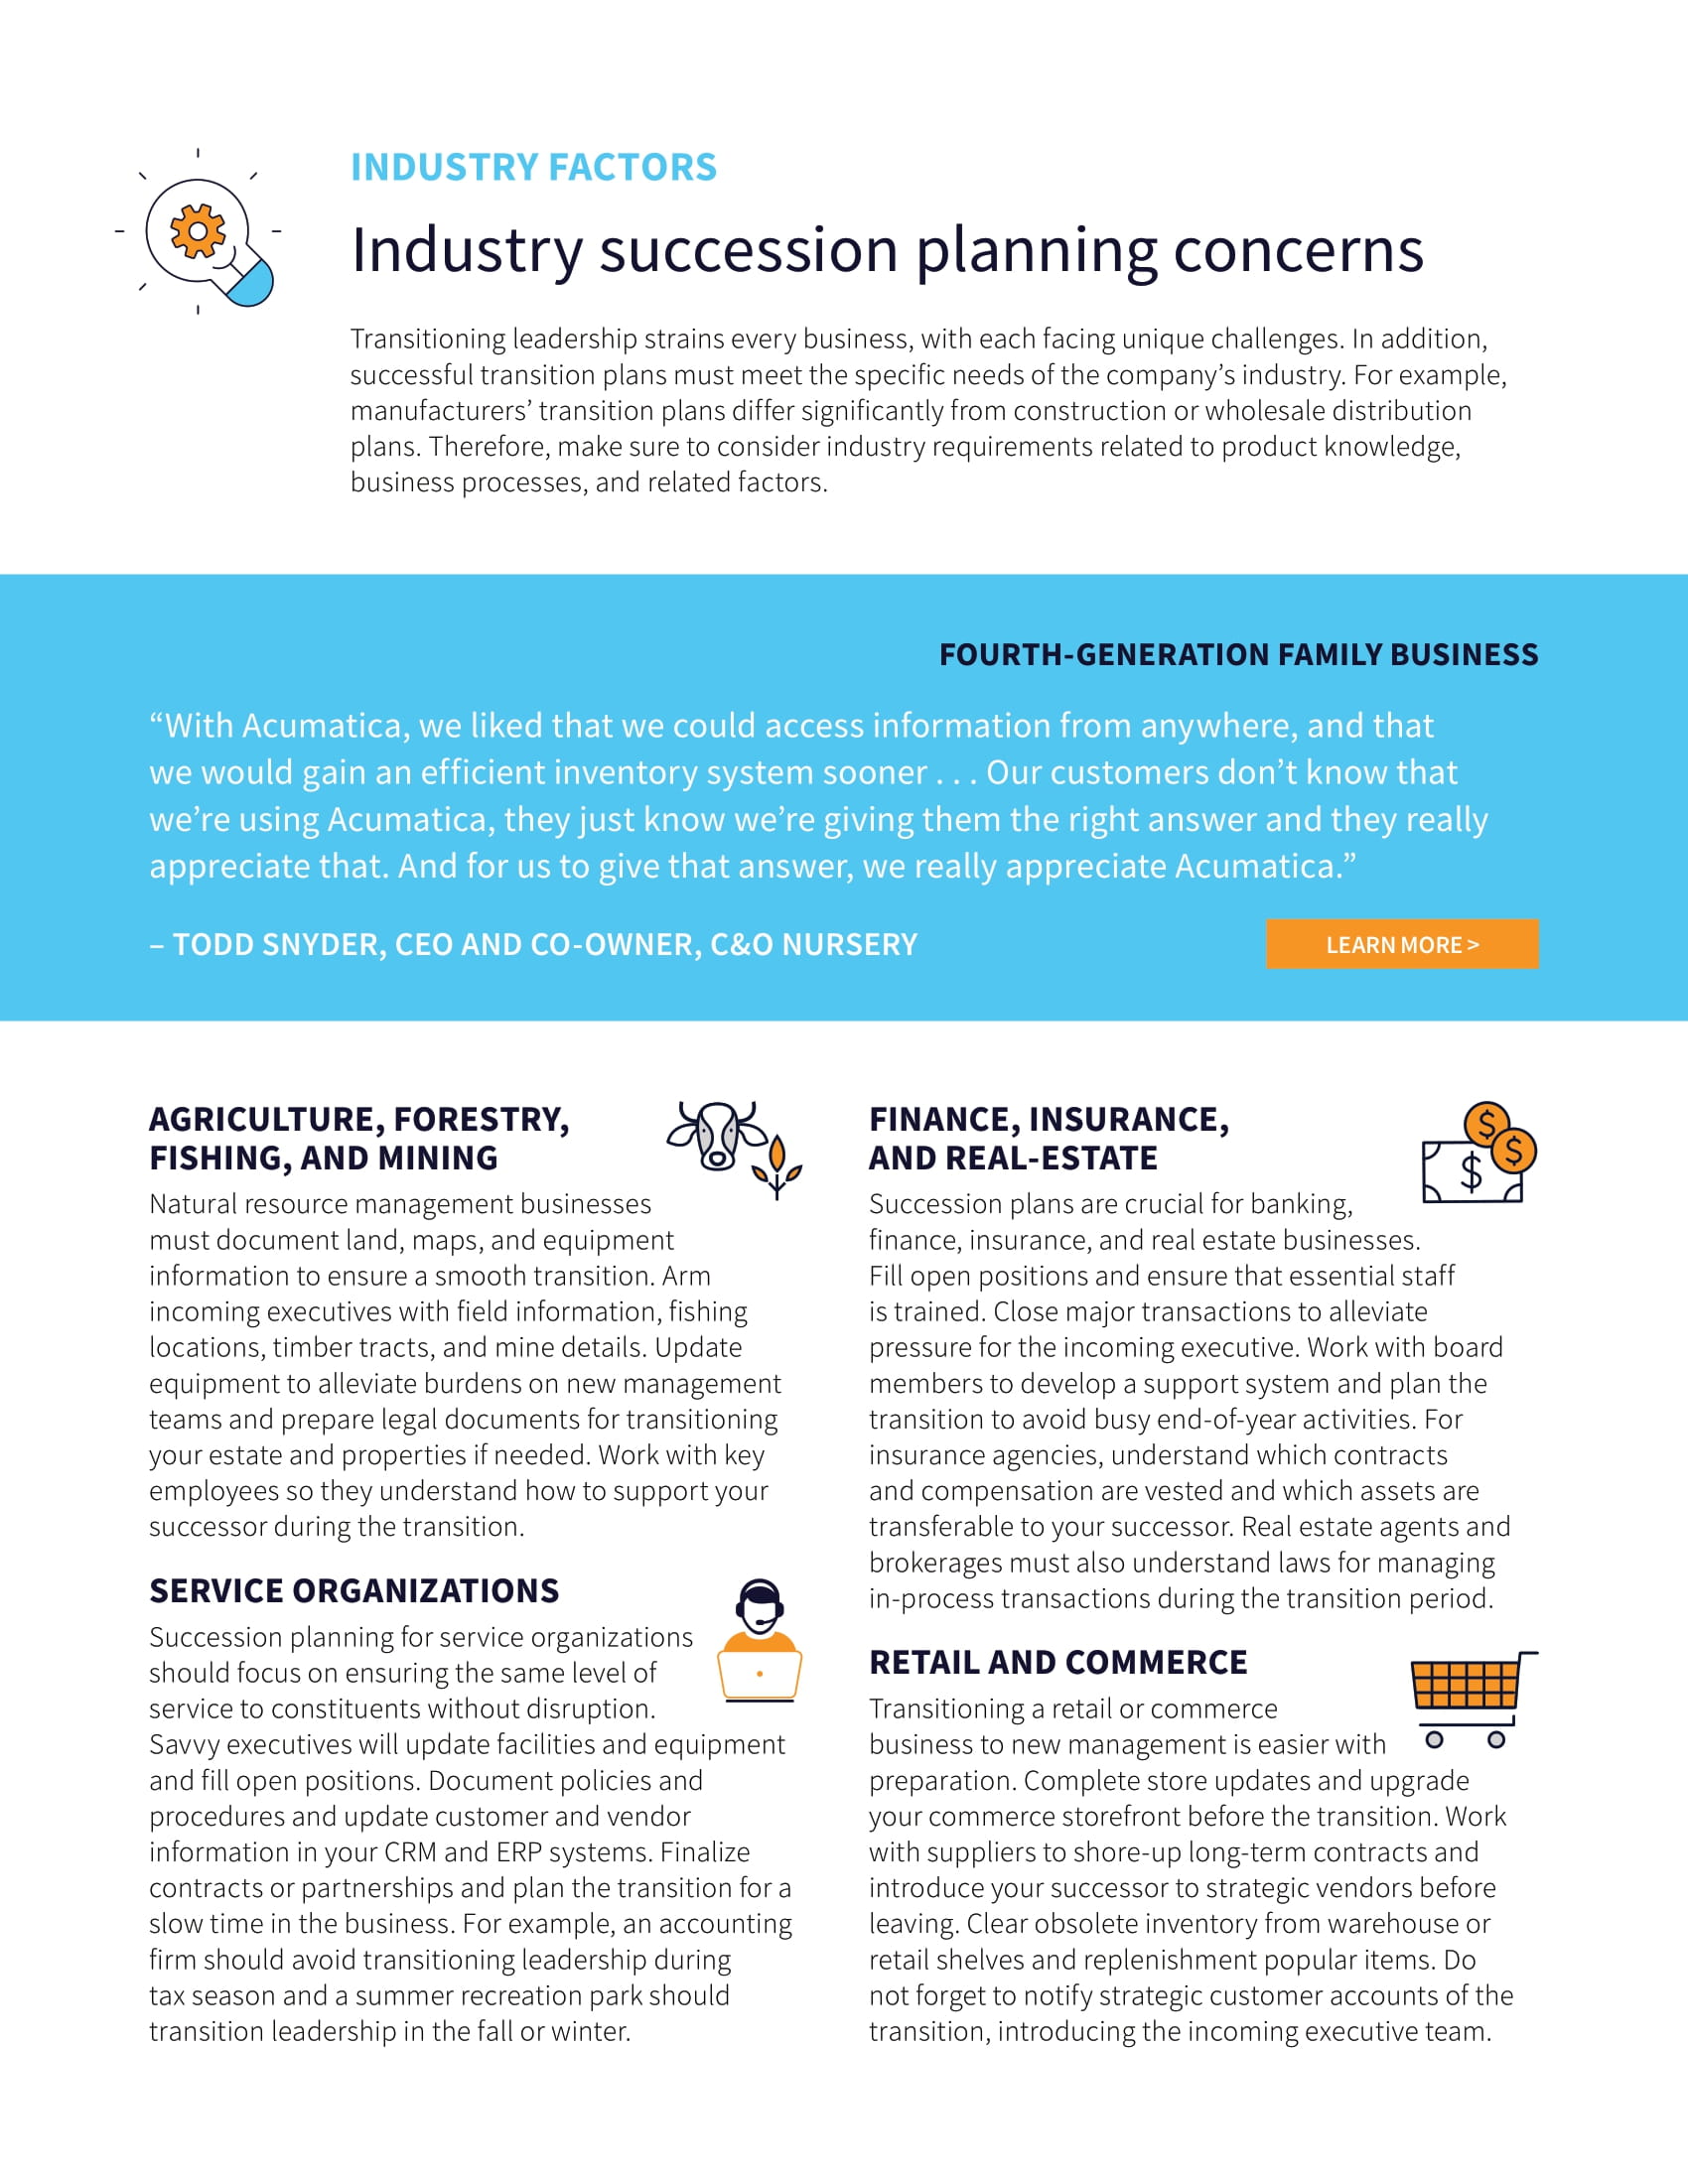 Why Succession Planning is So Important (and How to Do It Right), page 2